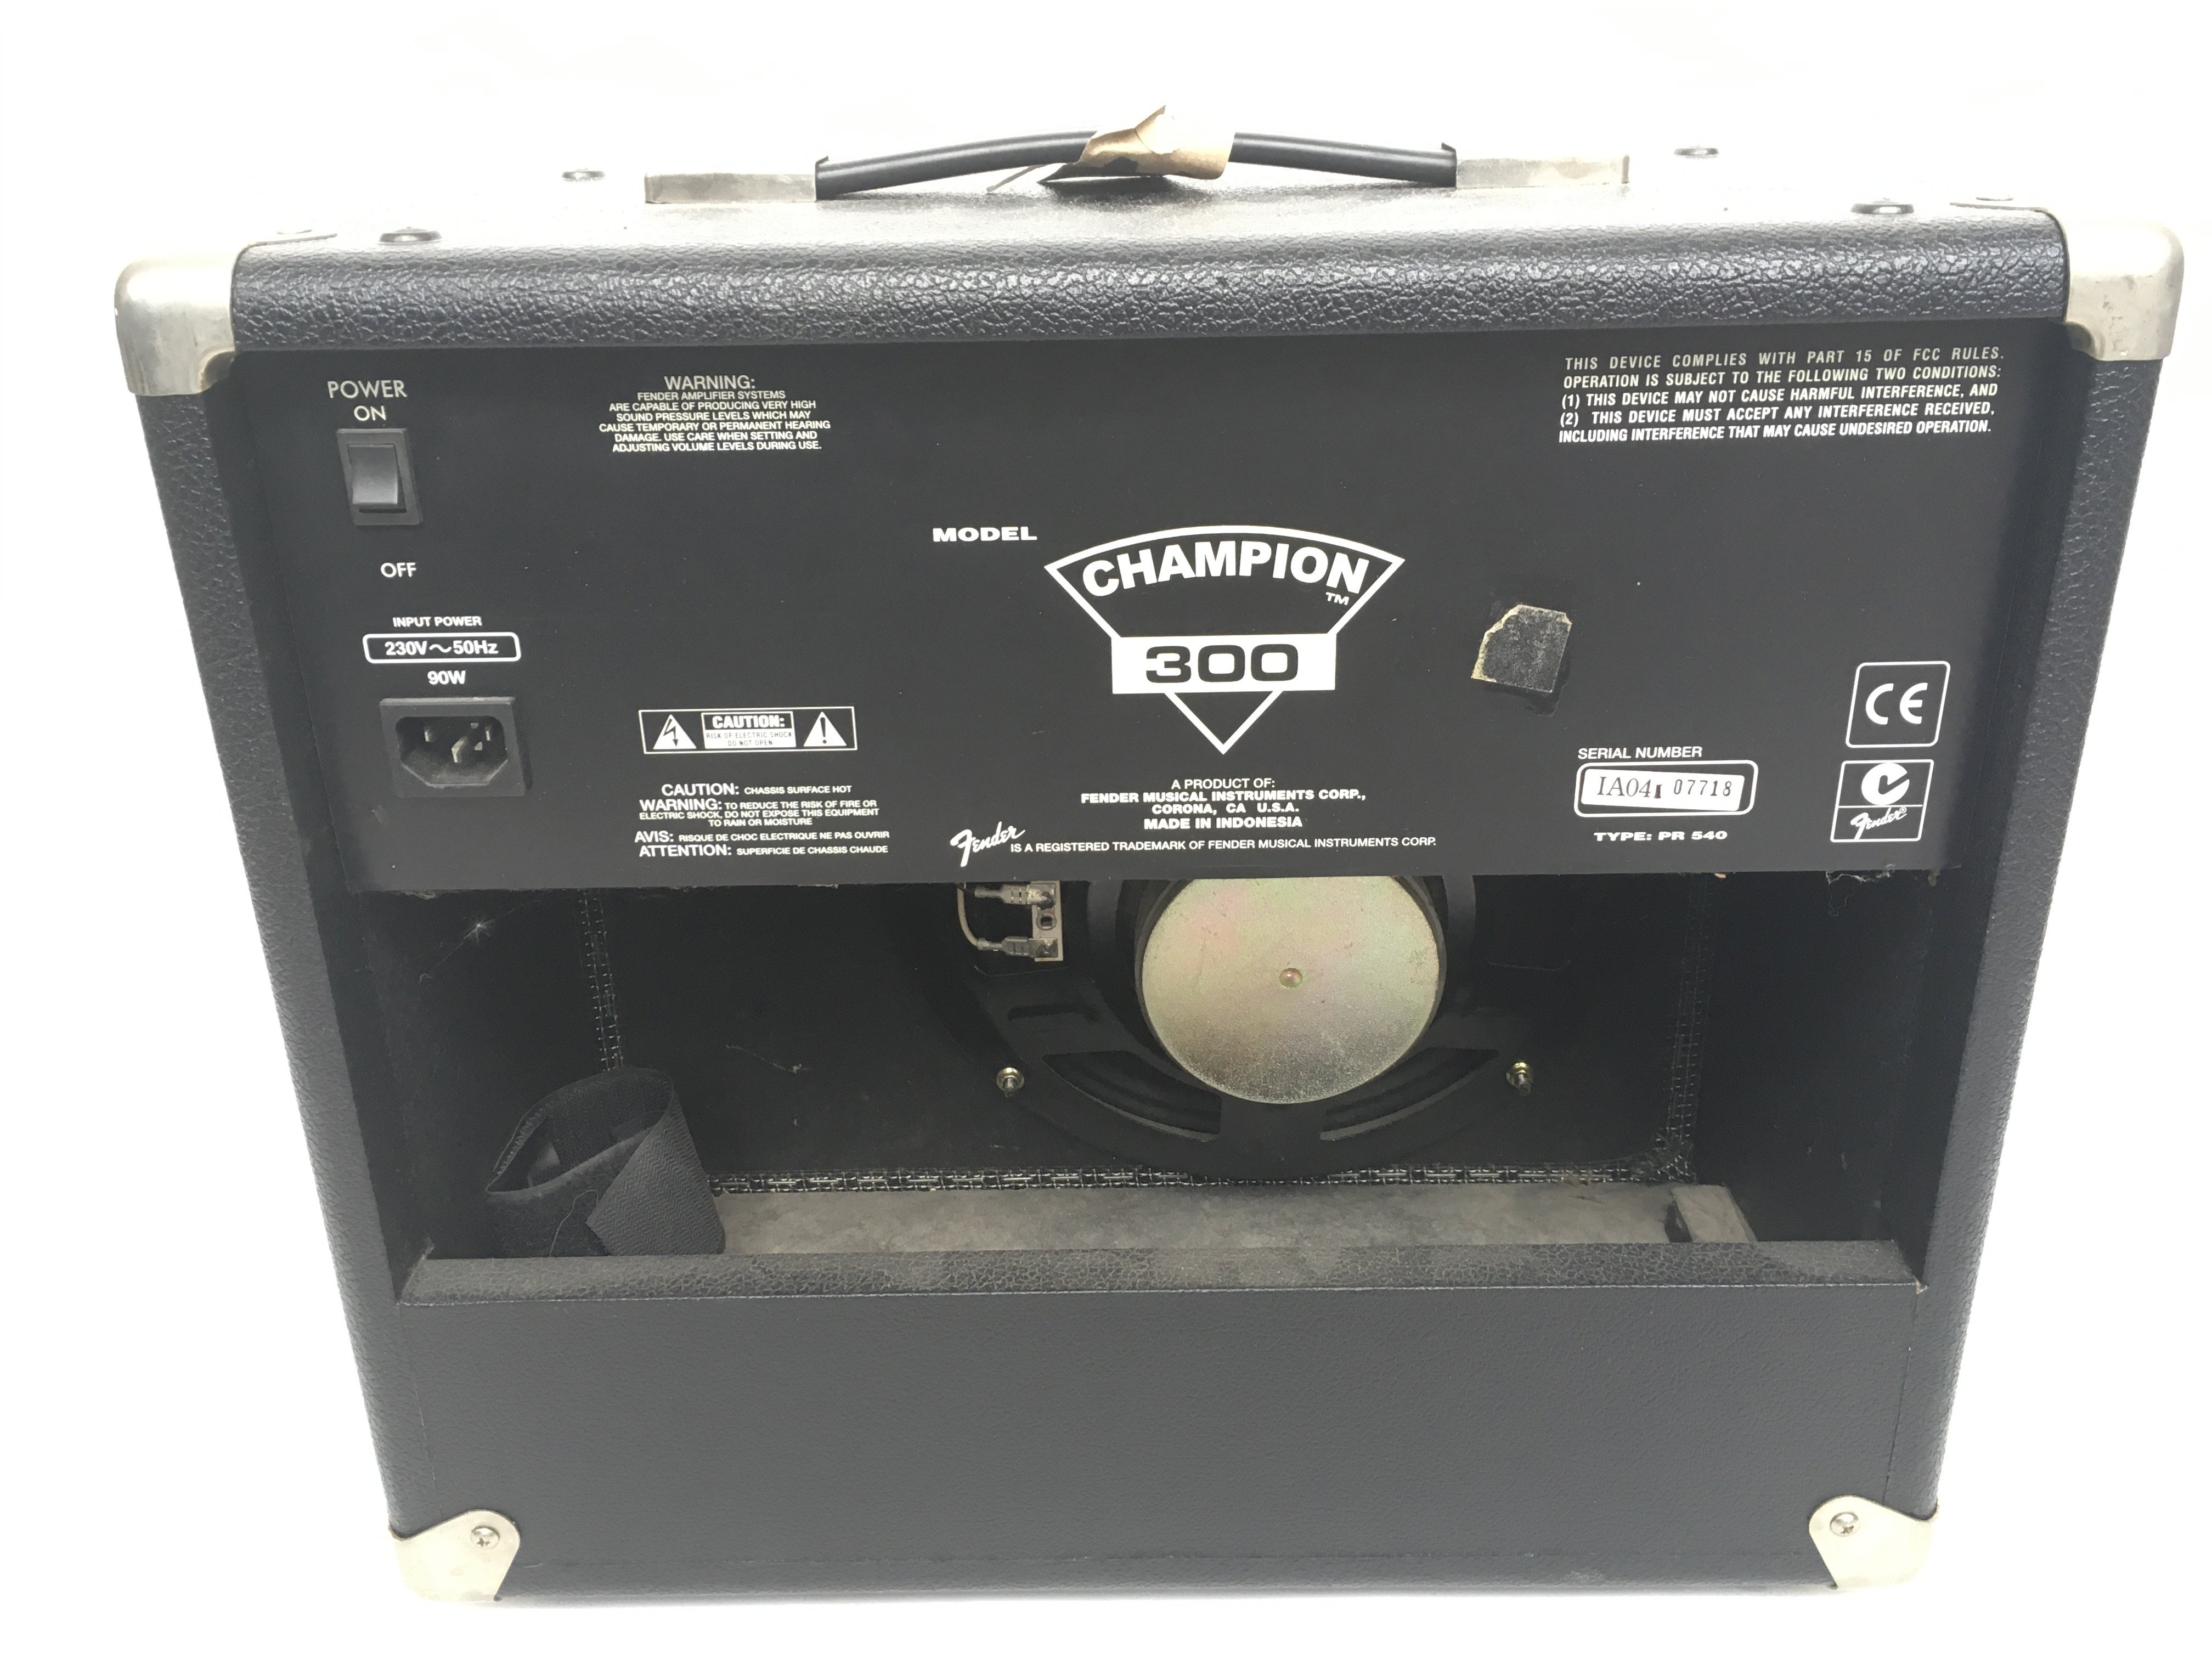 A Fender Champion 300 guitar amplifier. - Image 2 of 2